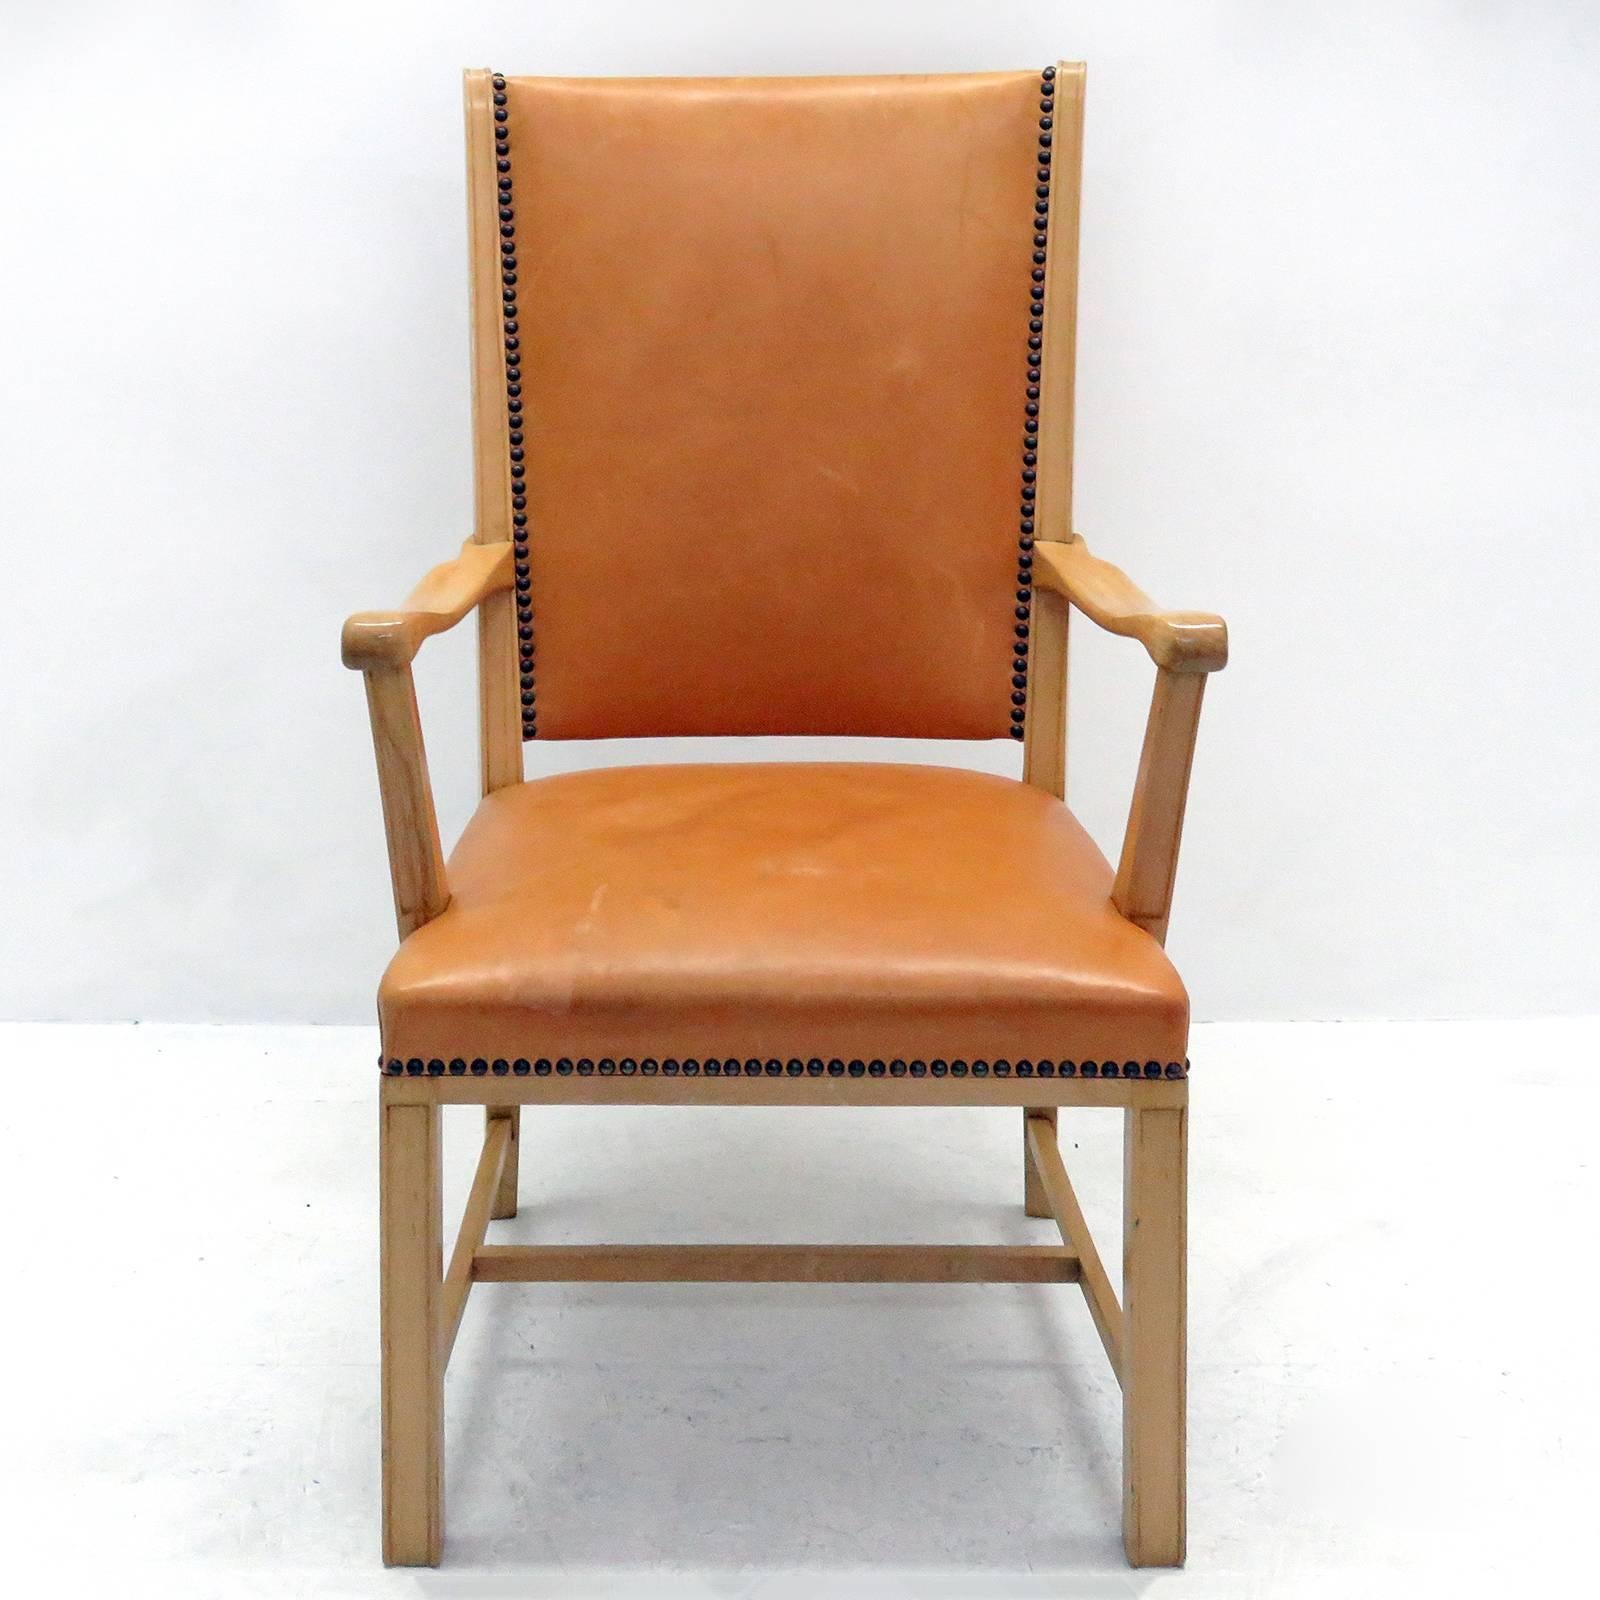 Elegant 1940s Swedish highback armchair in beechwood with cognac colored leather upholstery and brass nailhead trim.